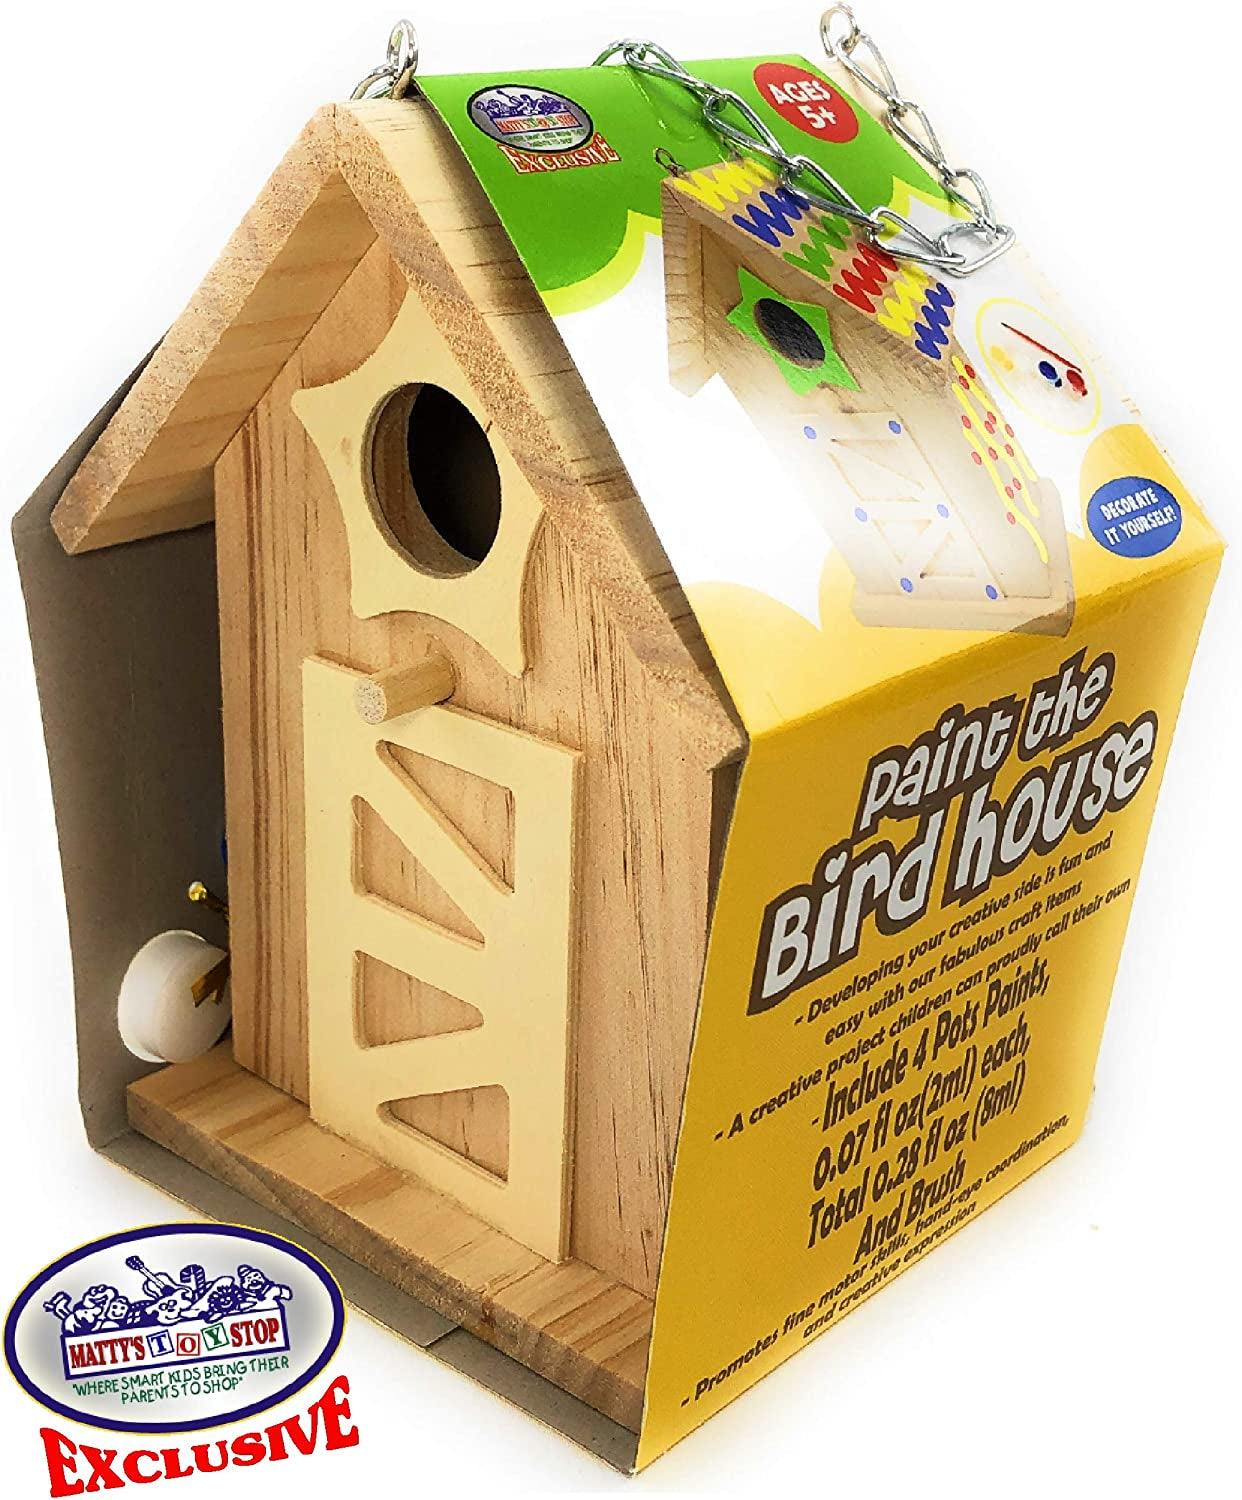 Paint Your Own Small Wooden Birdhouses (Includes Paints & Brushes) Gift Set Bundle - 3 Pack - WoodArtSupply